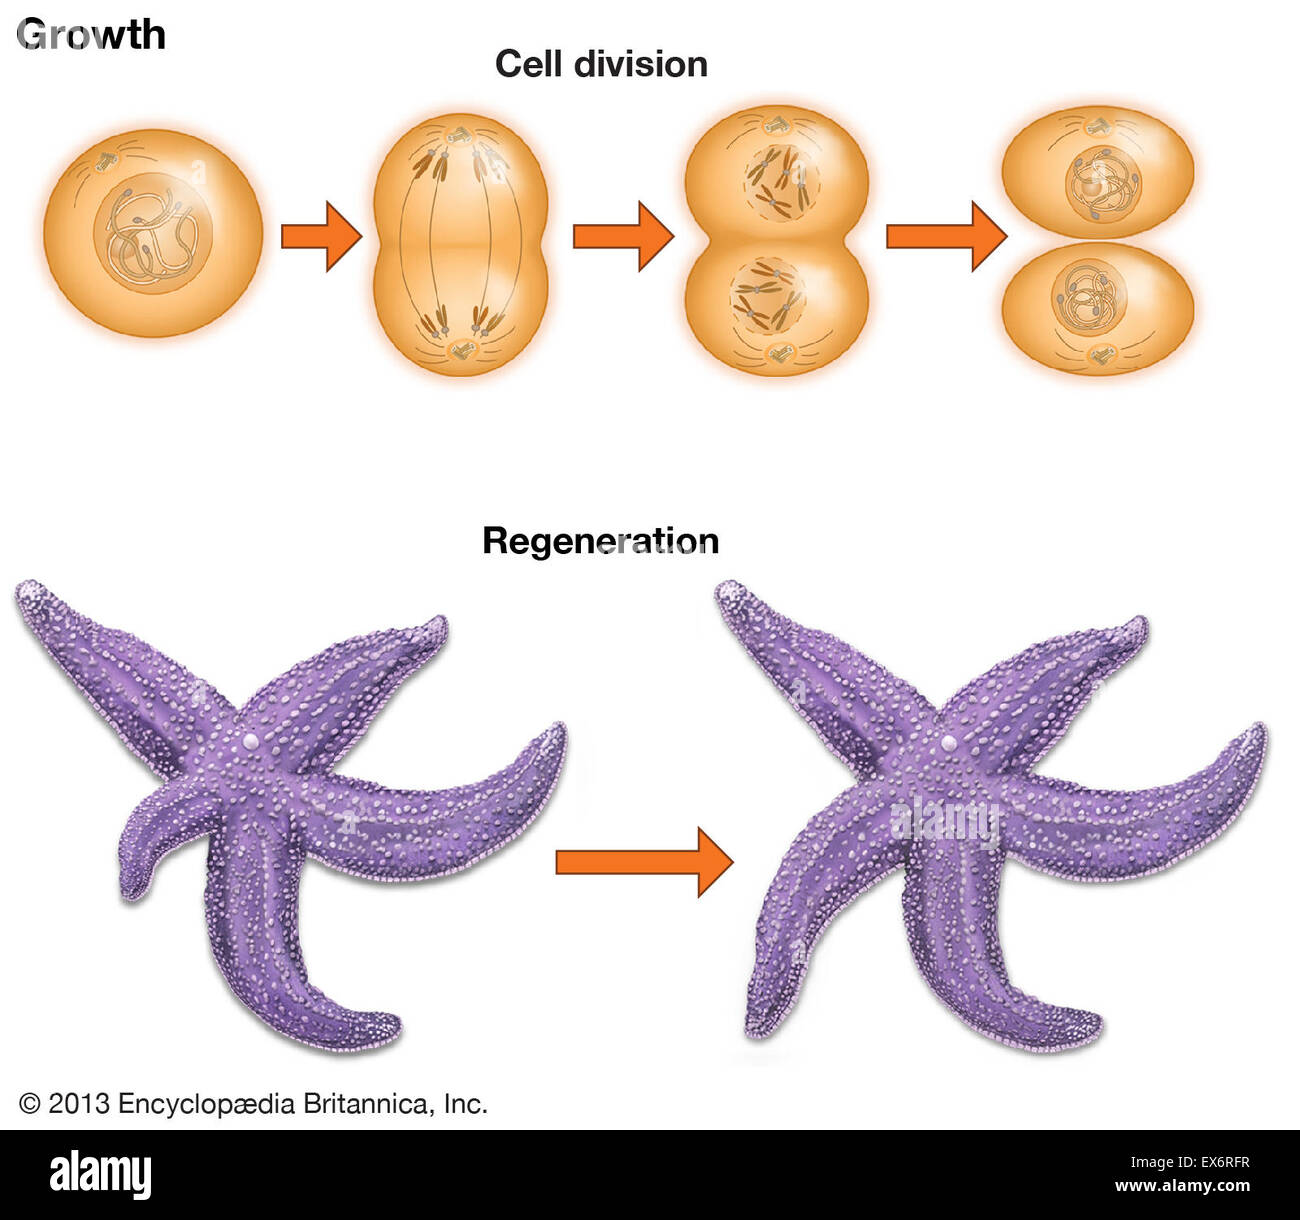 Cell growth and regeneration Stock Photo - Alamy